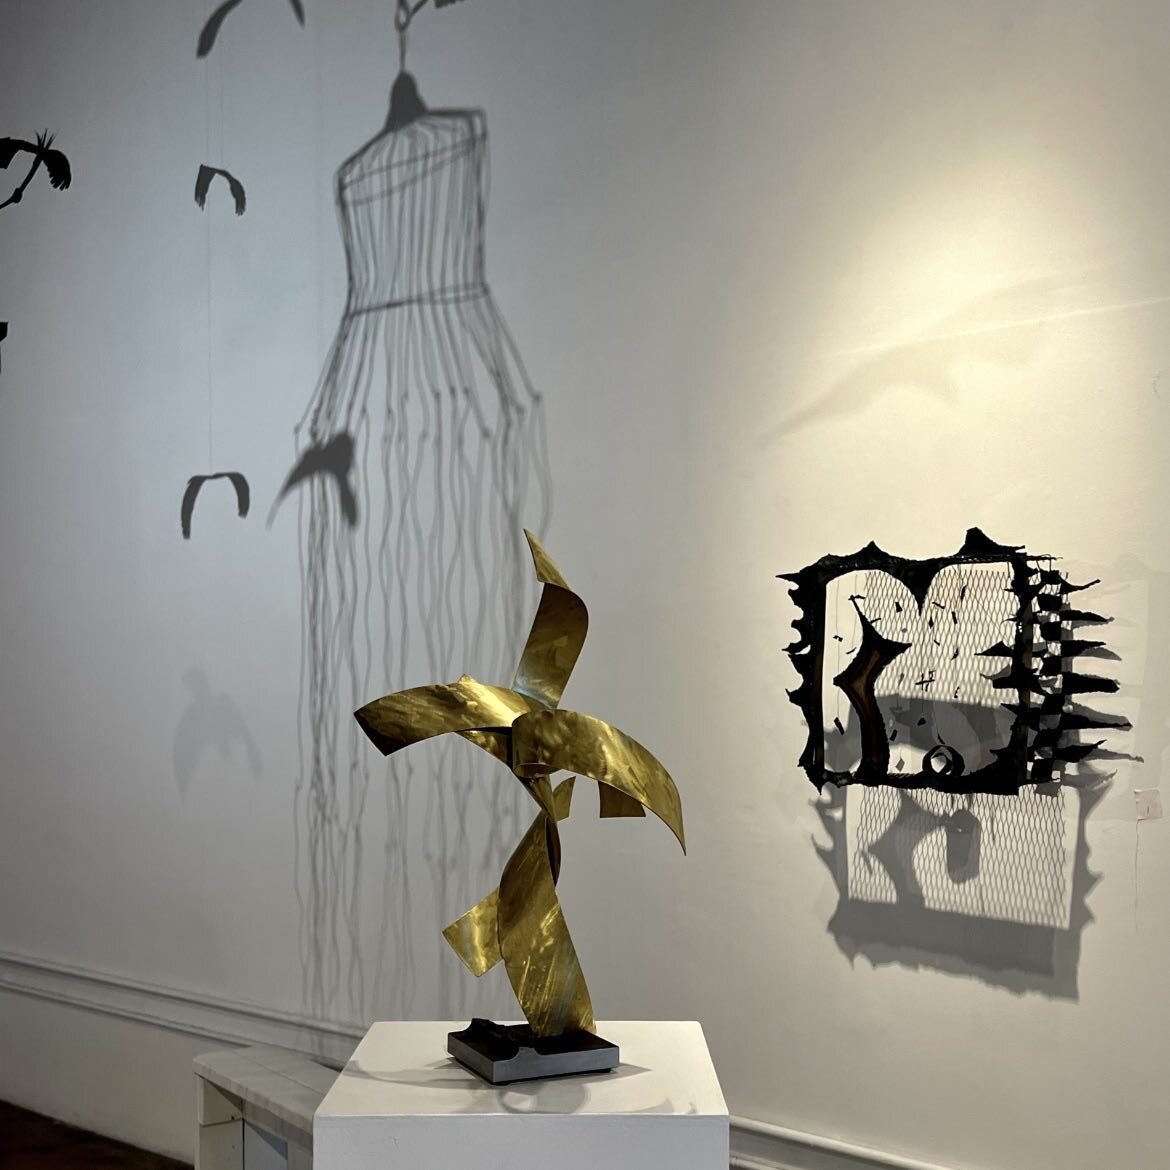 Check out the work of Sculptors Guild Member Damon Hamm @damon.hamm, Janet Goldner @janetgoldner and Alberto Bursztyn @albertomarcosbursztyn at the Culture Lab @culturelablic. The show &ldquo;Past Tense/Future Infinite&rdquo; is on view until April 3